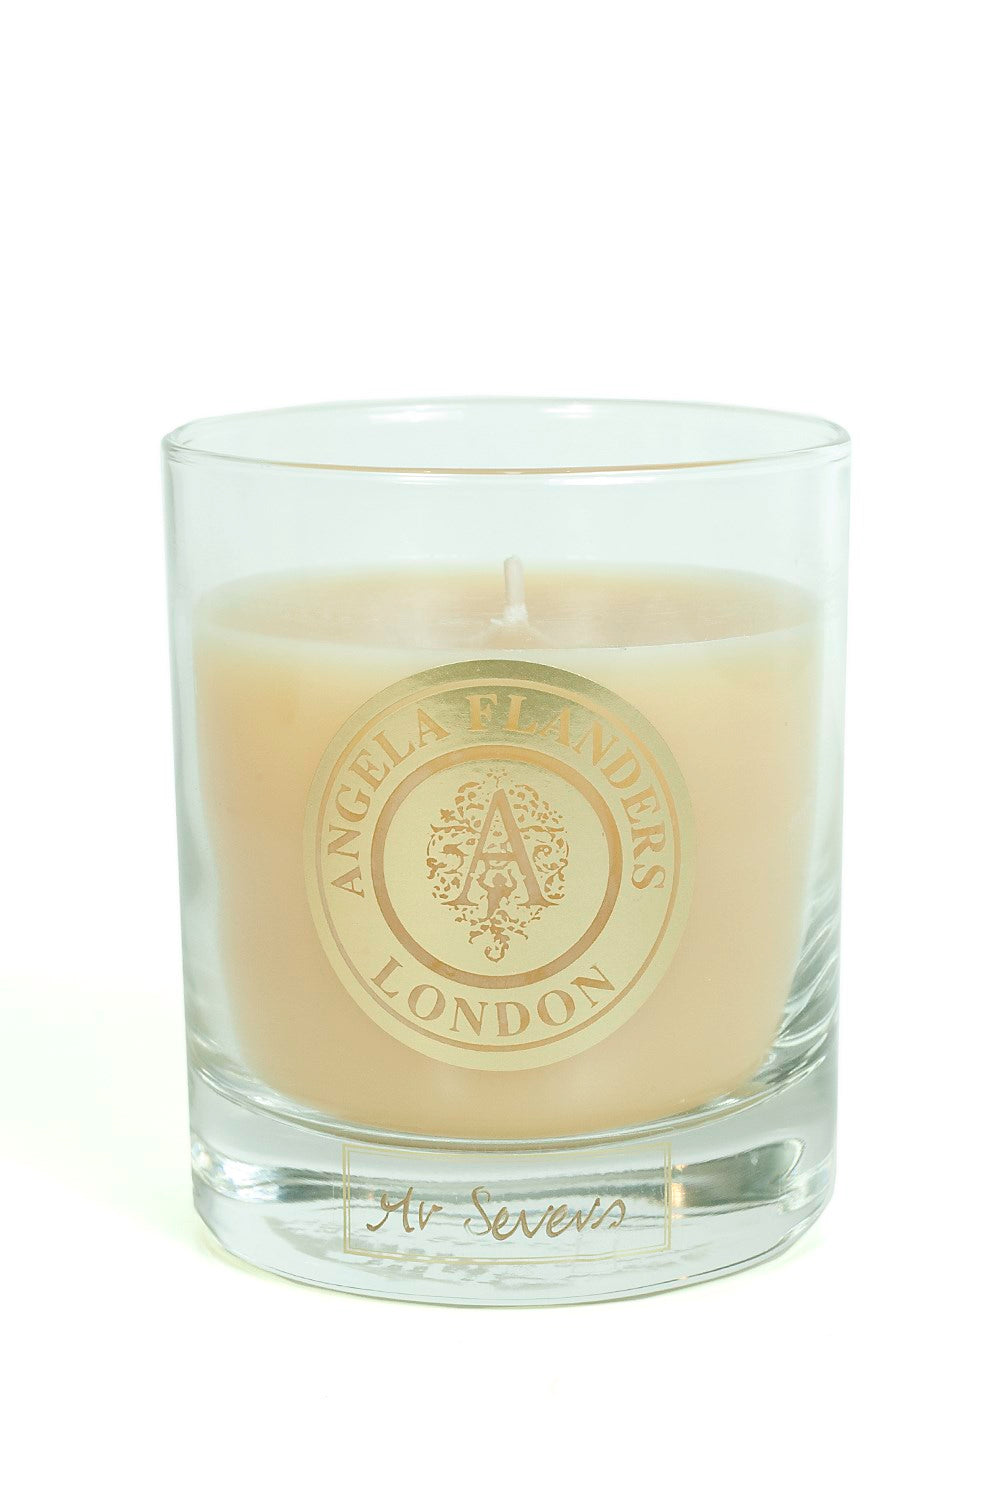 Angela Flanders Mr Severs Scented Candle